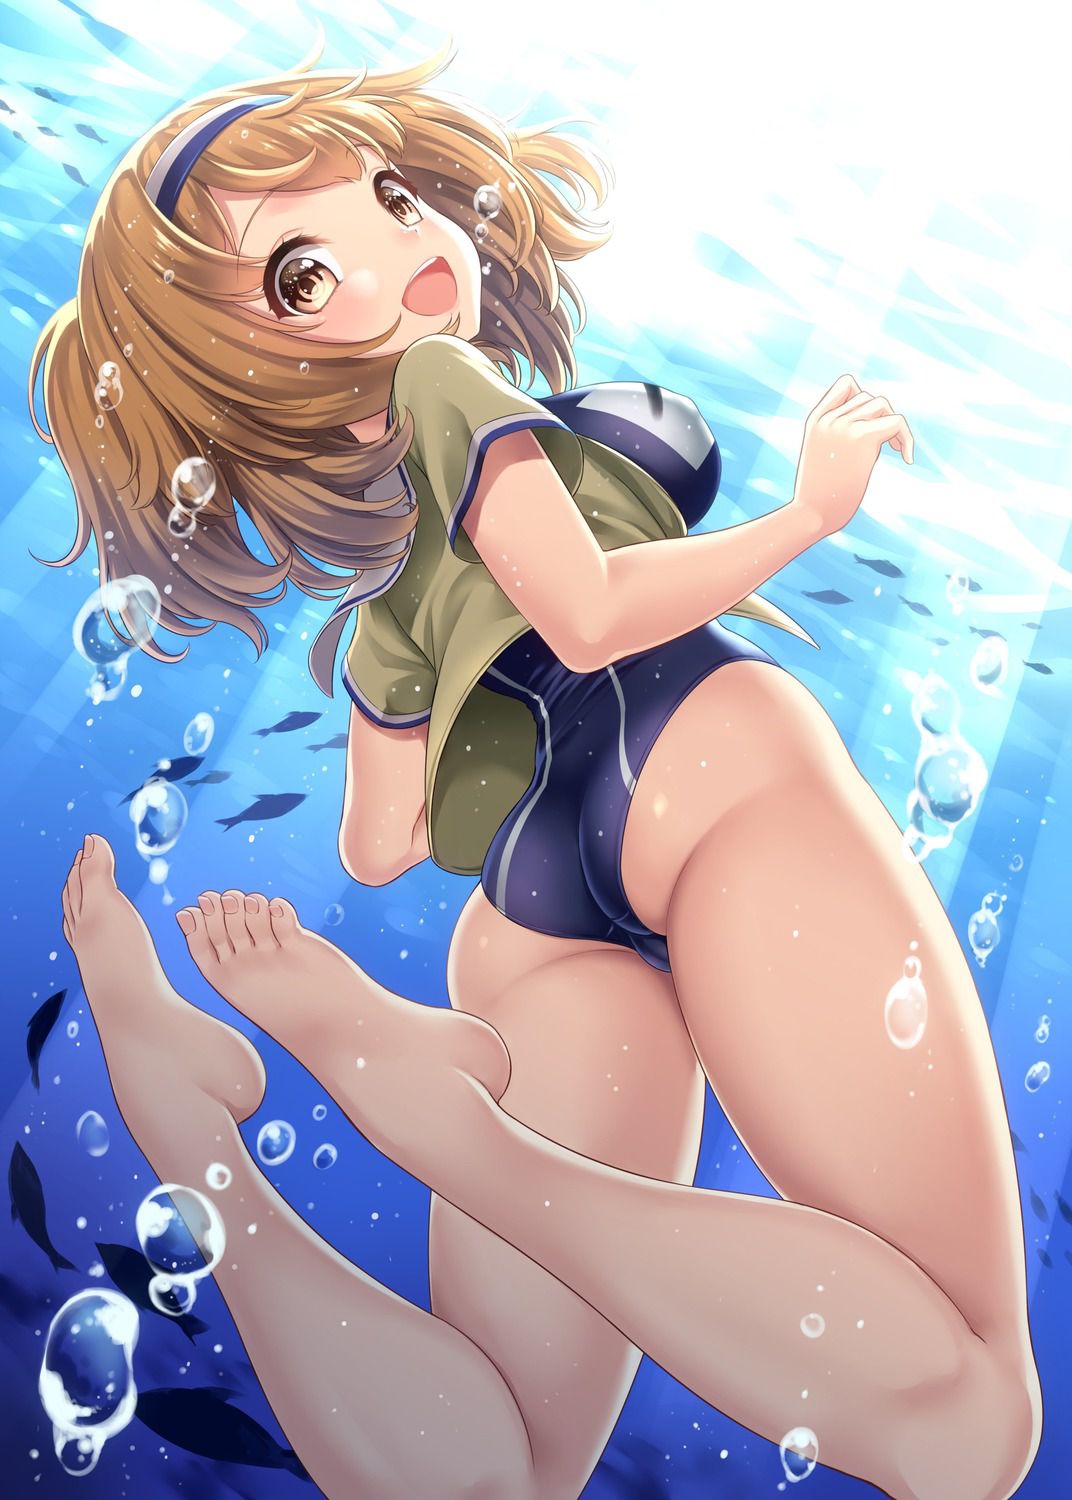 [Ship it] 2 n Chanko and submarine I-26. Five things you want nimnim [pictures and wallpapers] (fleet abcdcollectionsabcdviewing-ship it-39) 3